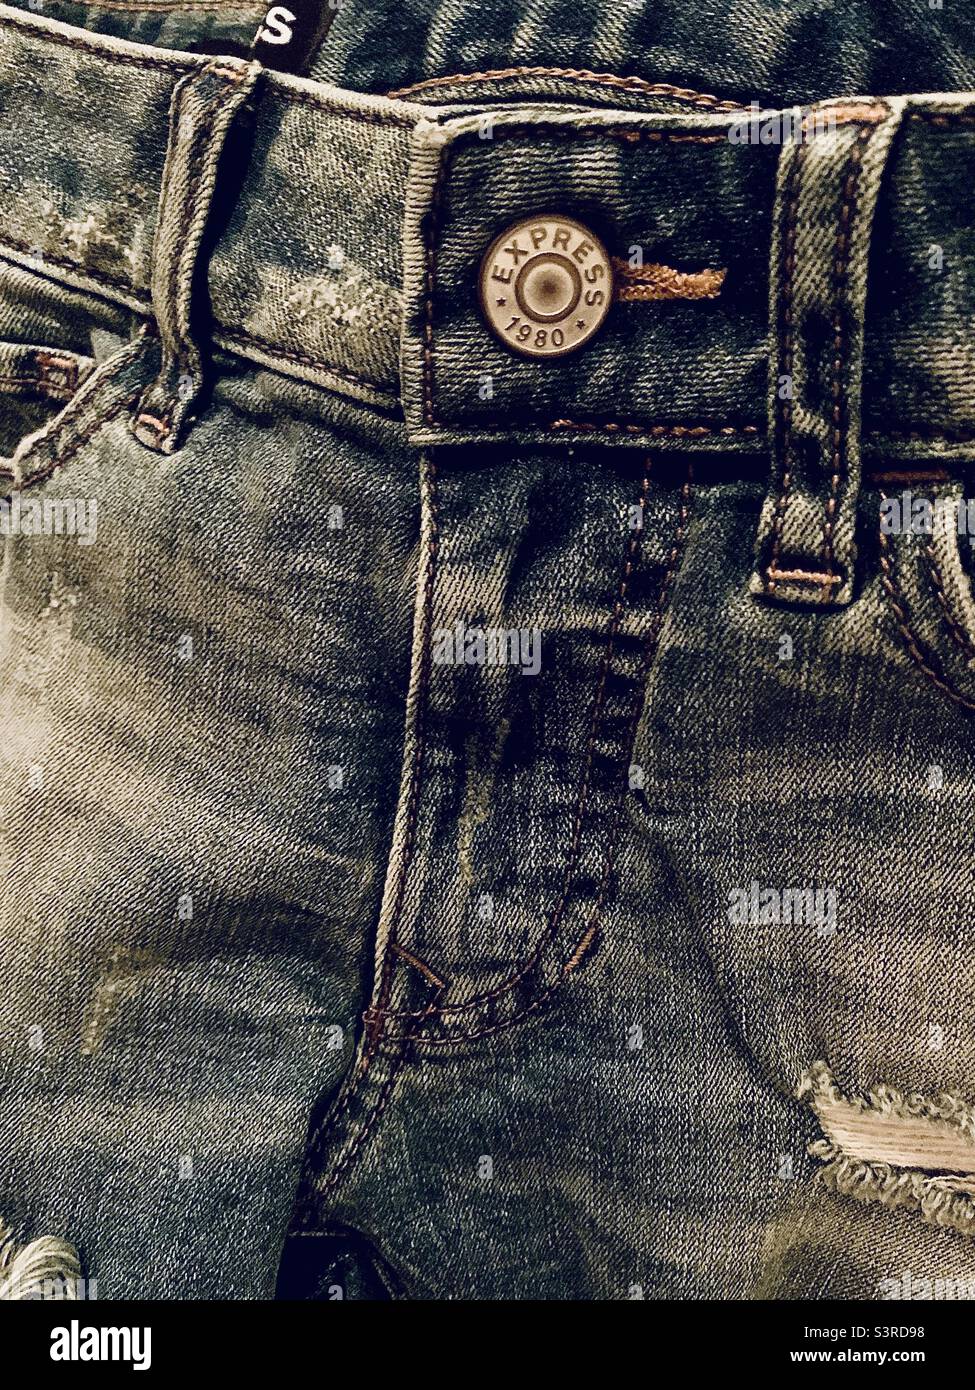 Worn in blue jeans Stock Photo